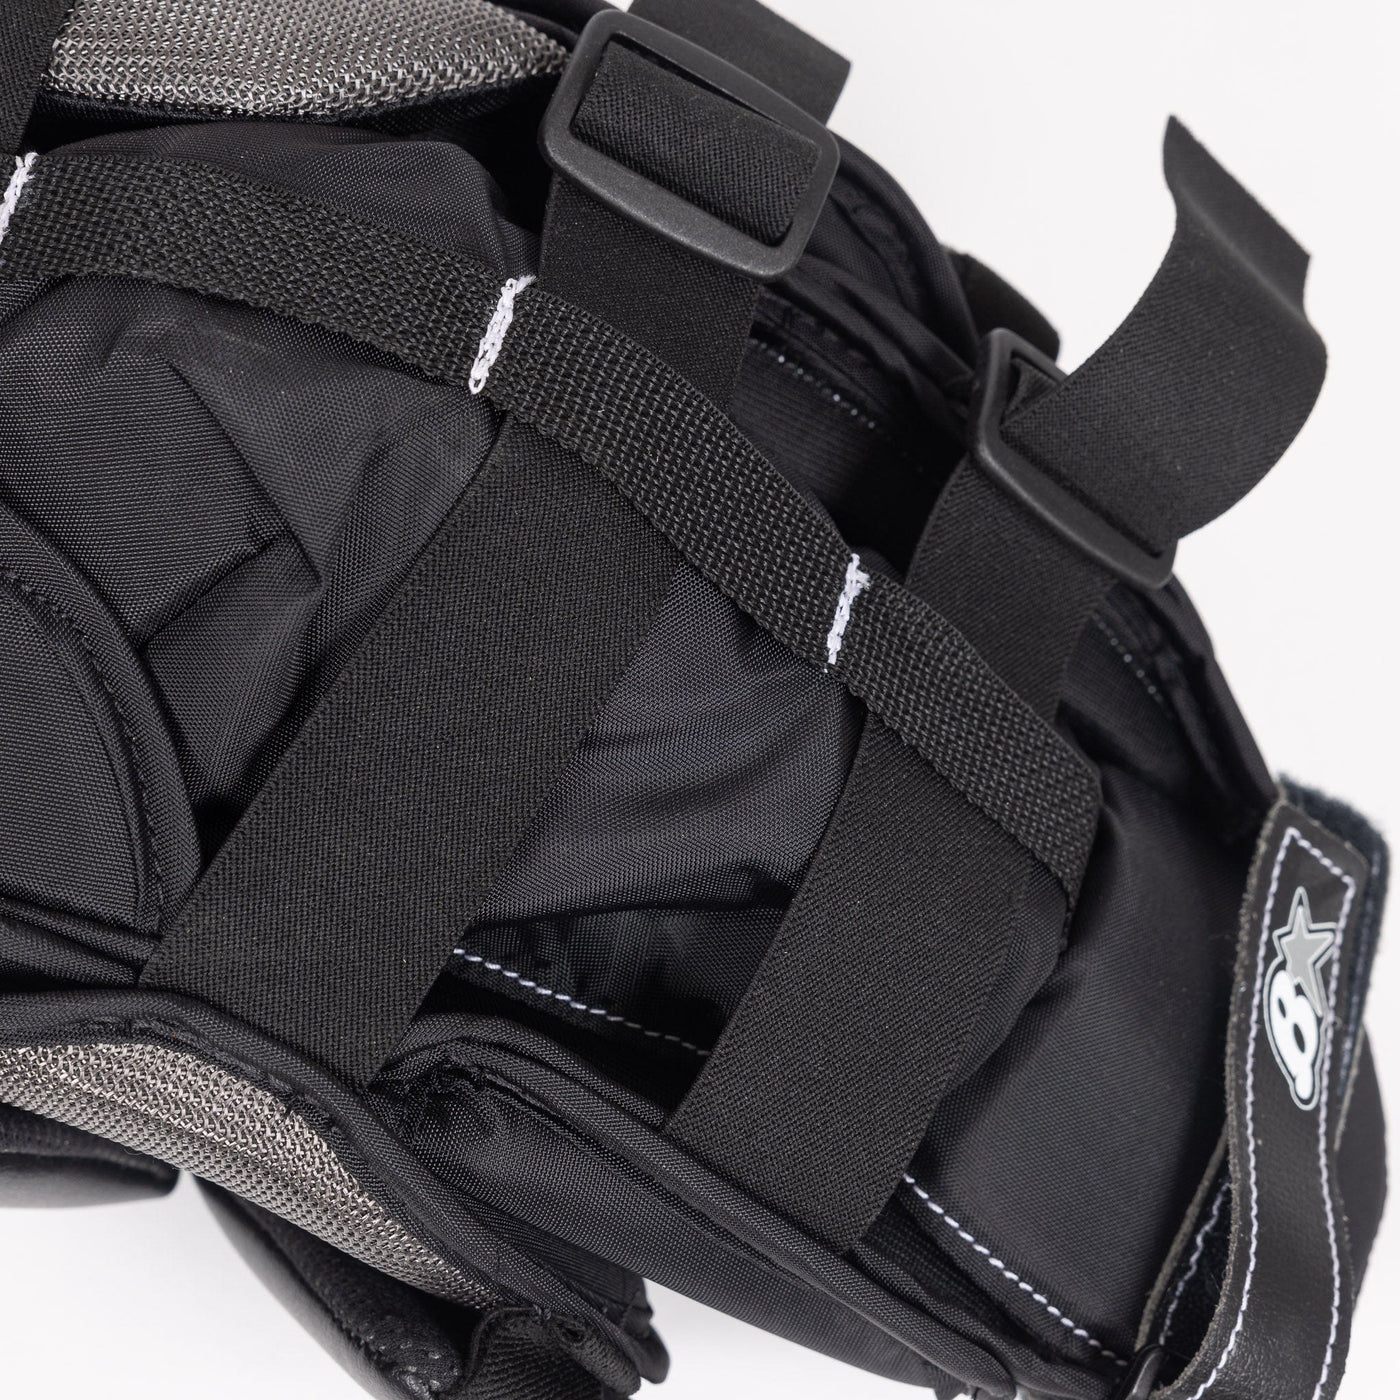 Brian's OPTiK 3 Senior Chest & Arm Protector - The Hockey Shop Source For Sports